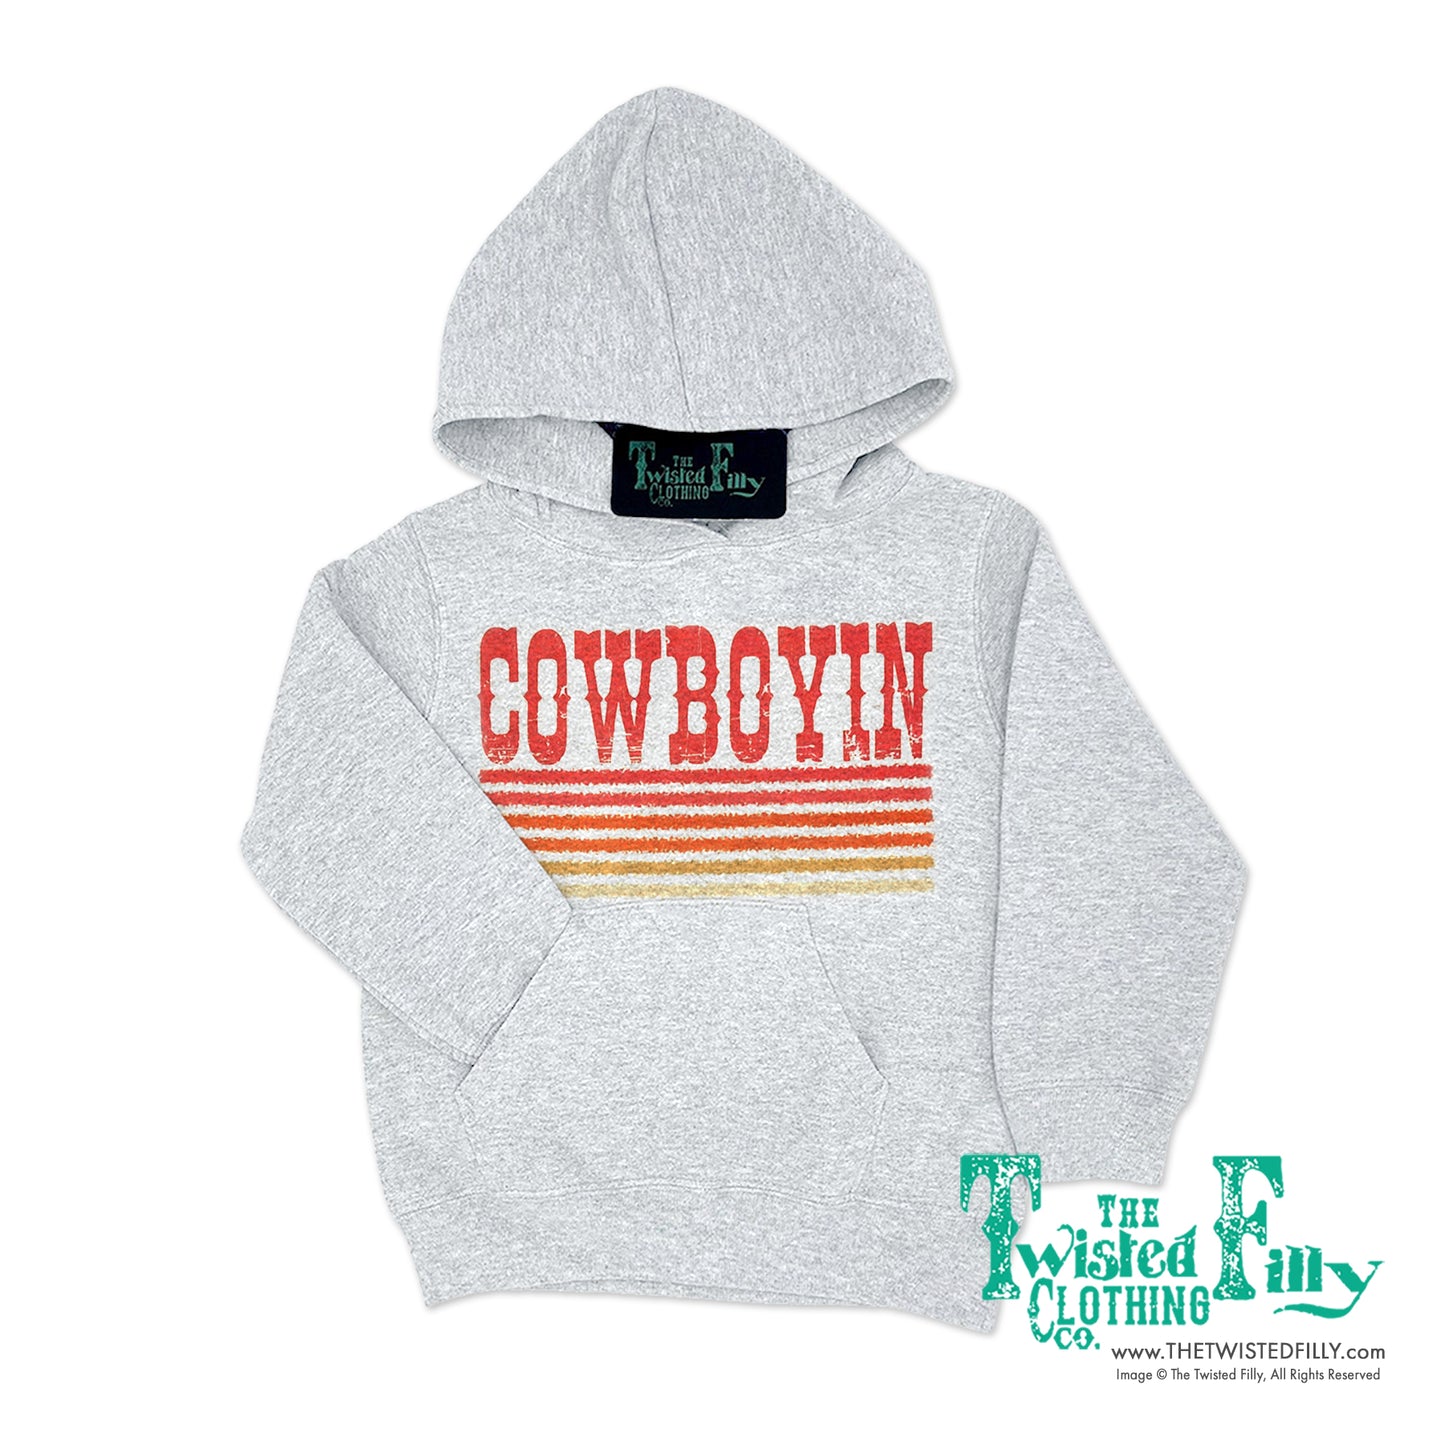 Retro Cowboyin - Youth Hoodie - Assorted Colors